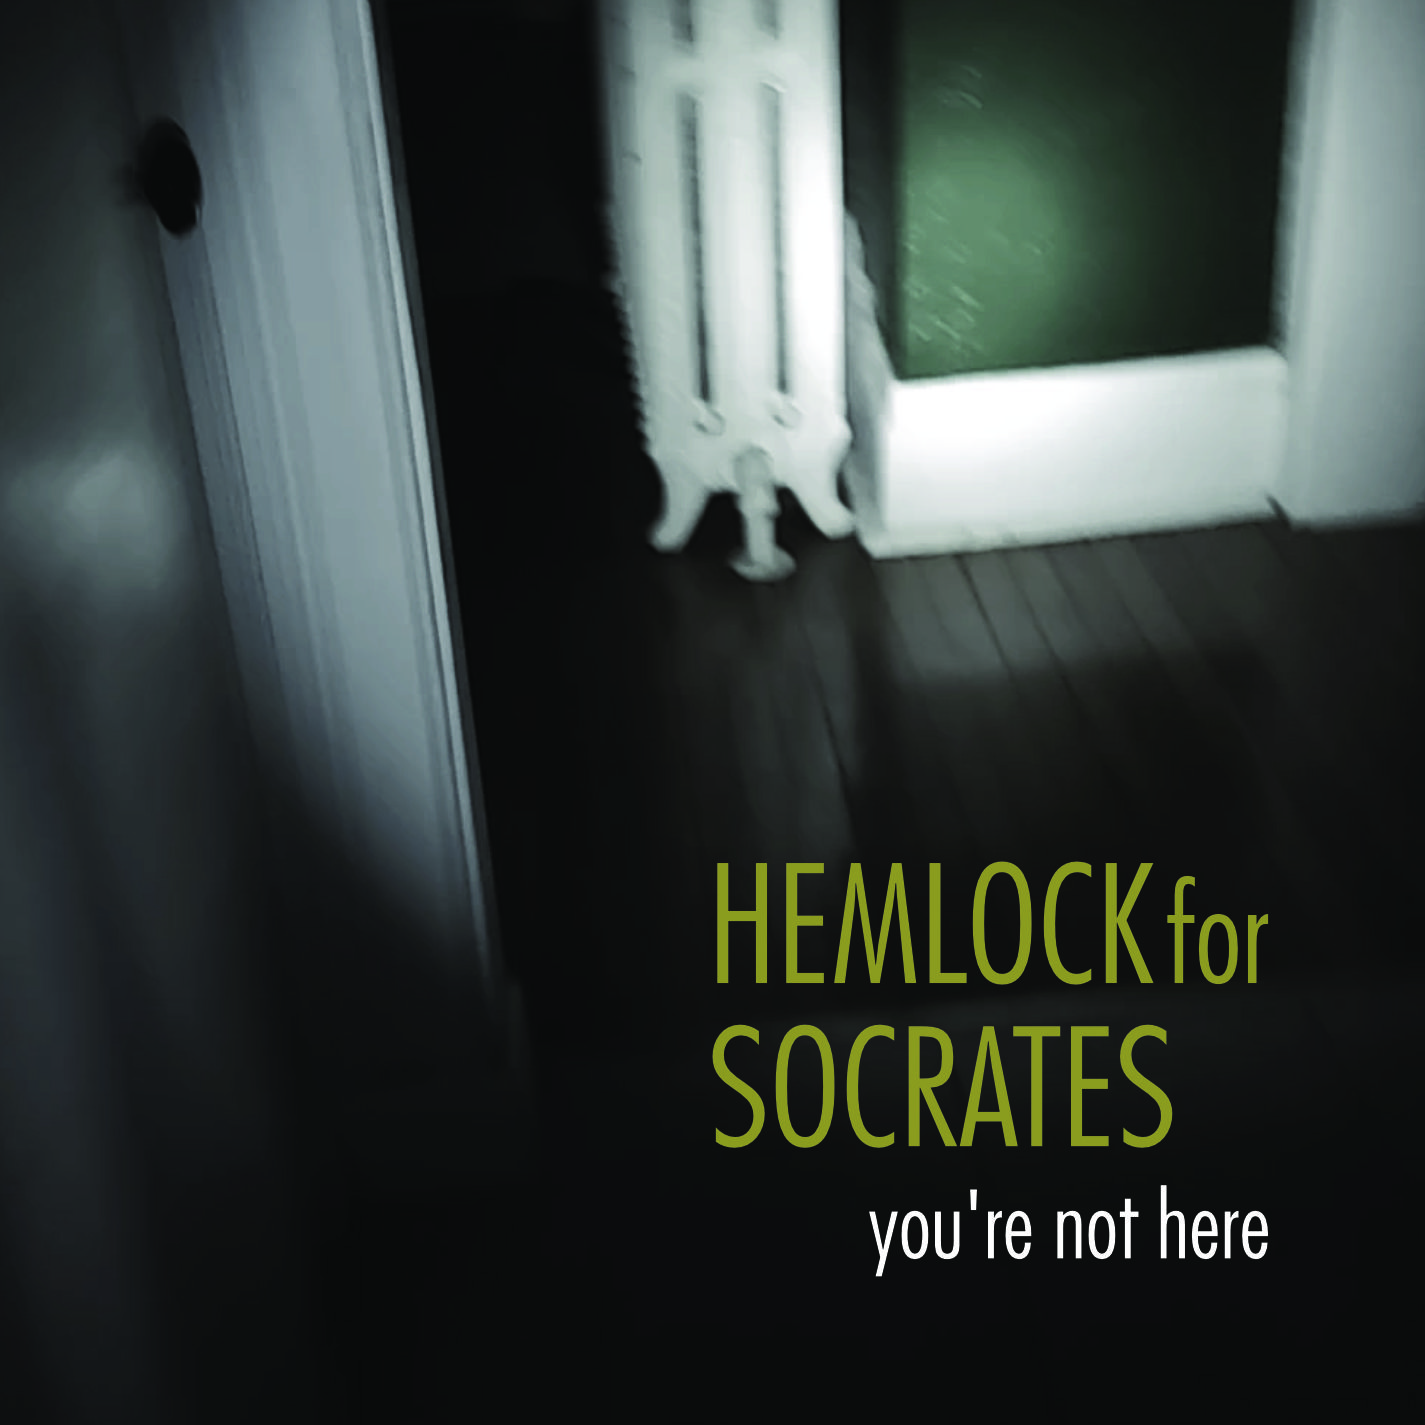 Hemlock for Socrates Debut Video for Bitter and Bereft Dark Disco Track “You’re Not Here”